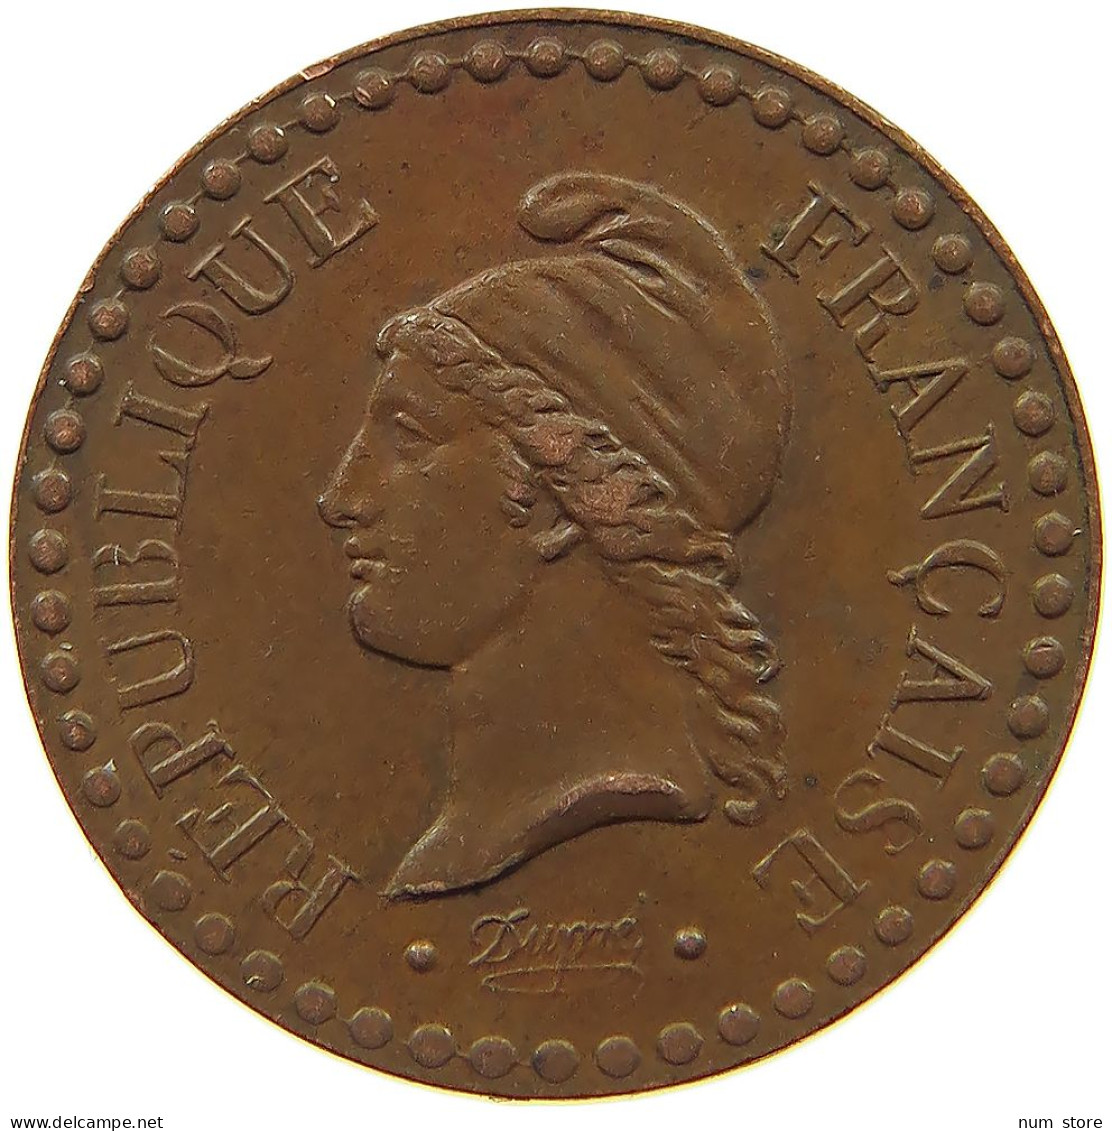 FRANCE CENTIME 1848 A  #s078 1009 - 1 Centime